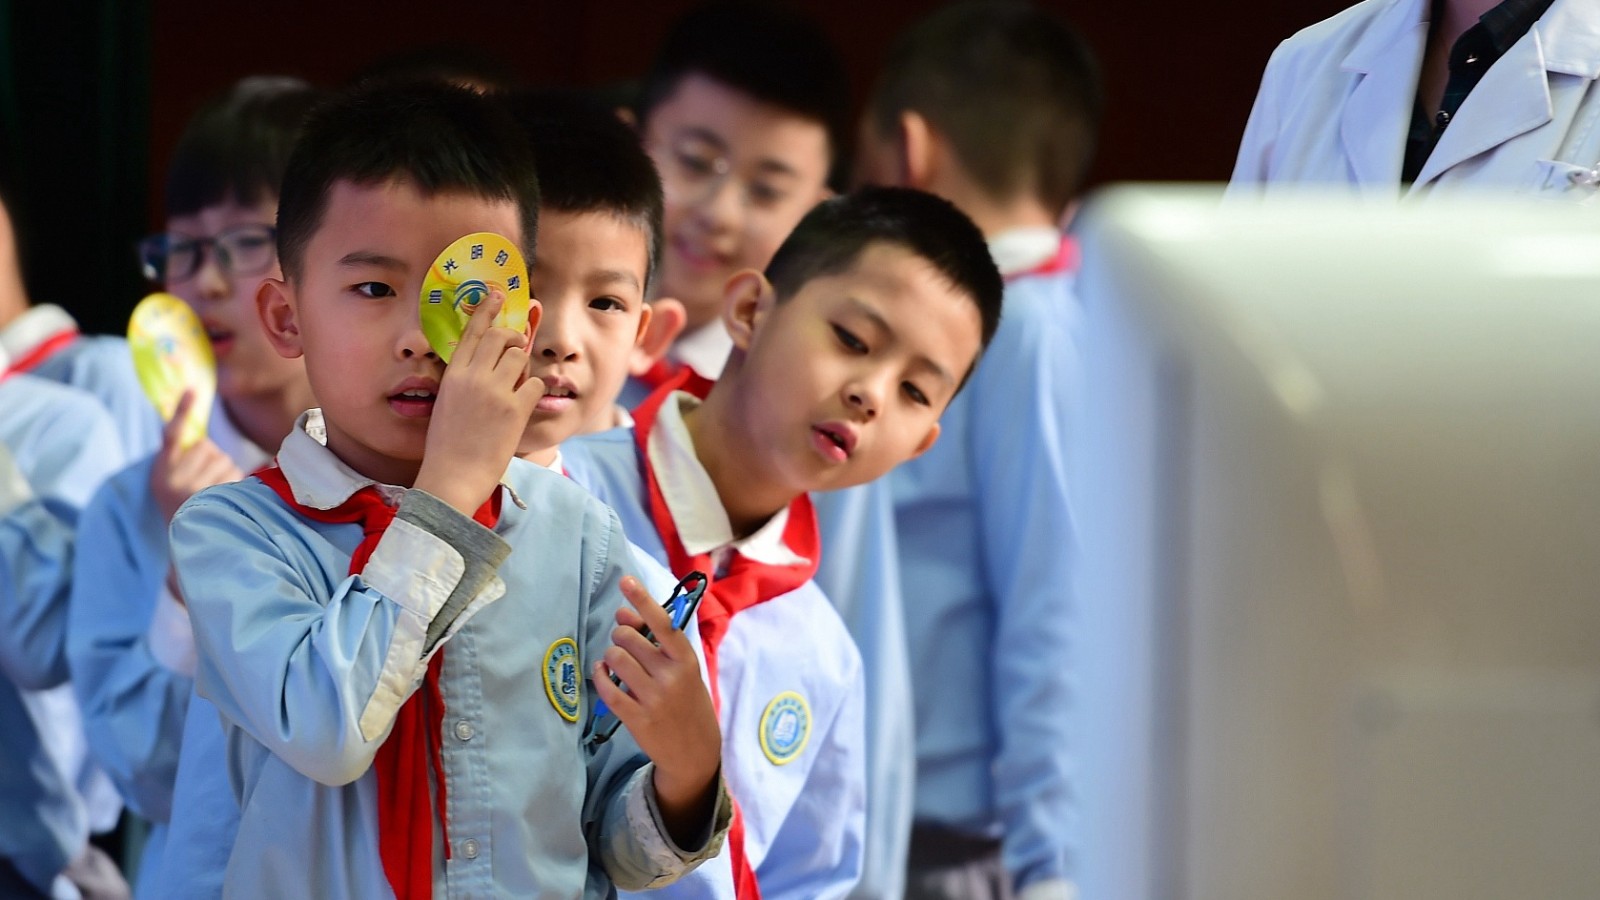 Students get vision checks at an elementary school in Cangzhou City, north China's Hebei Province, March 22, 2021. /CFP